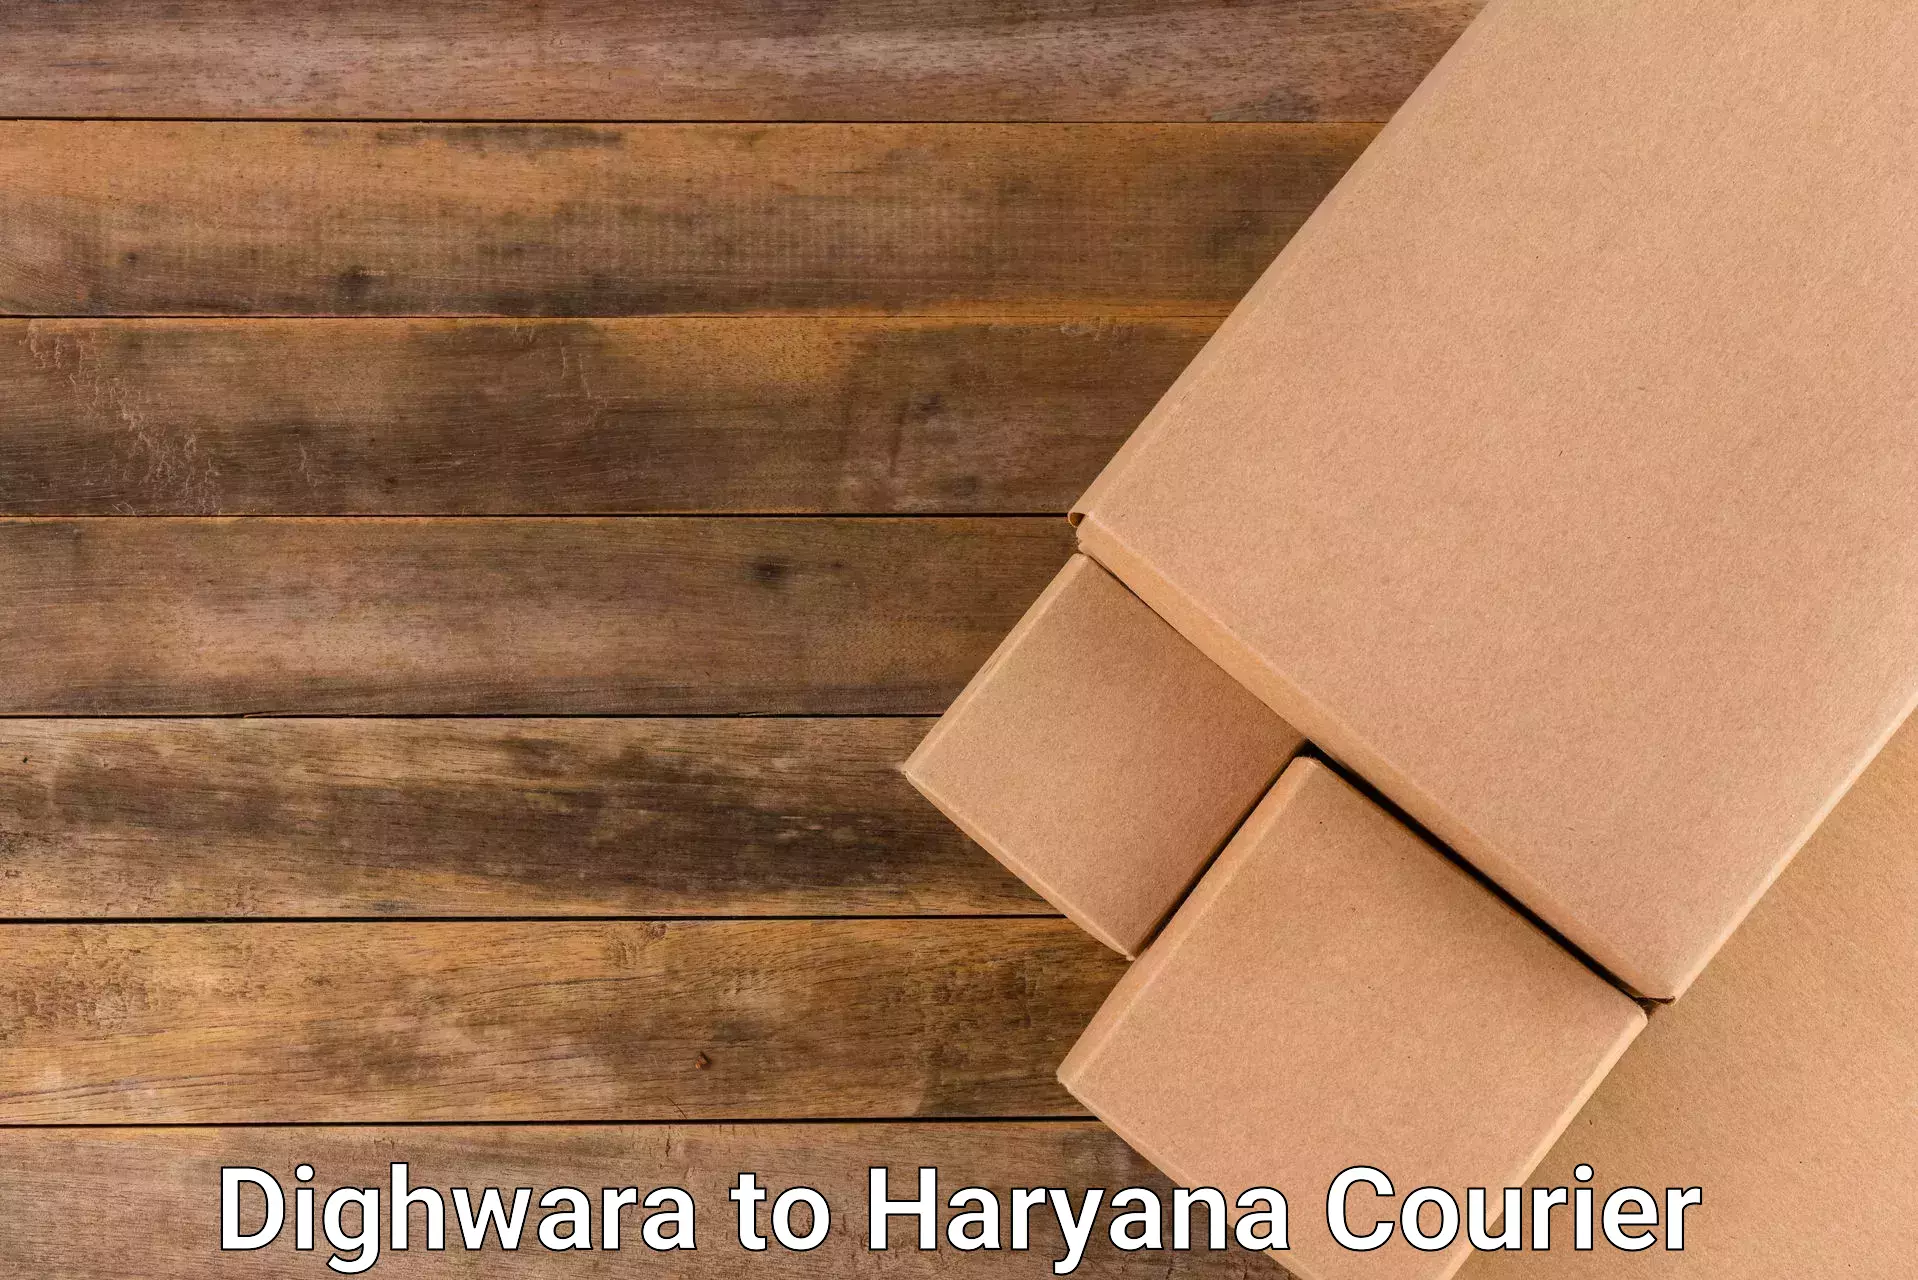 State-of-the-art courier technology Dighwara to Panchkula